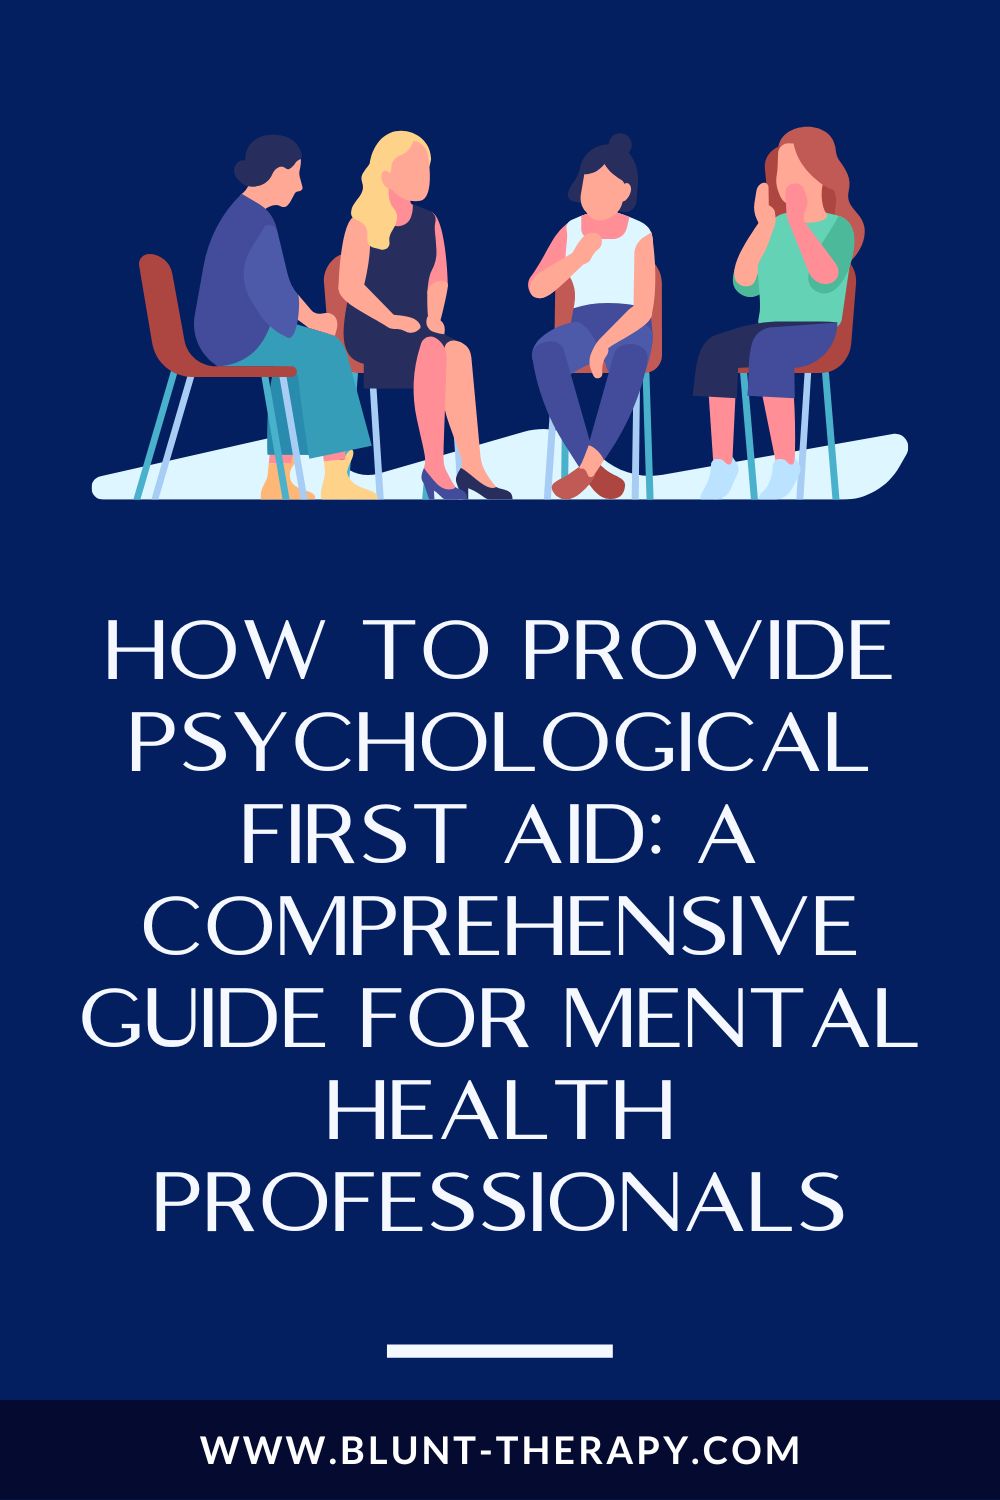 How to Provide Psychological First Aid: A Comprehensive Guide For Mental Health Professionals